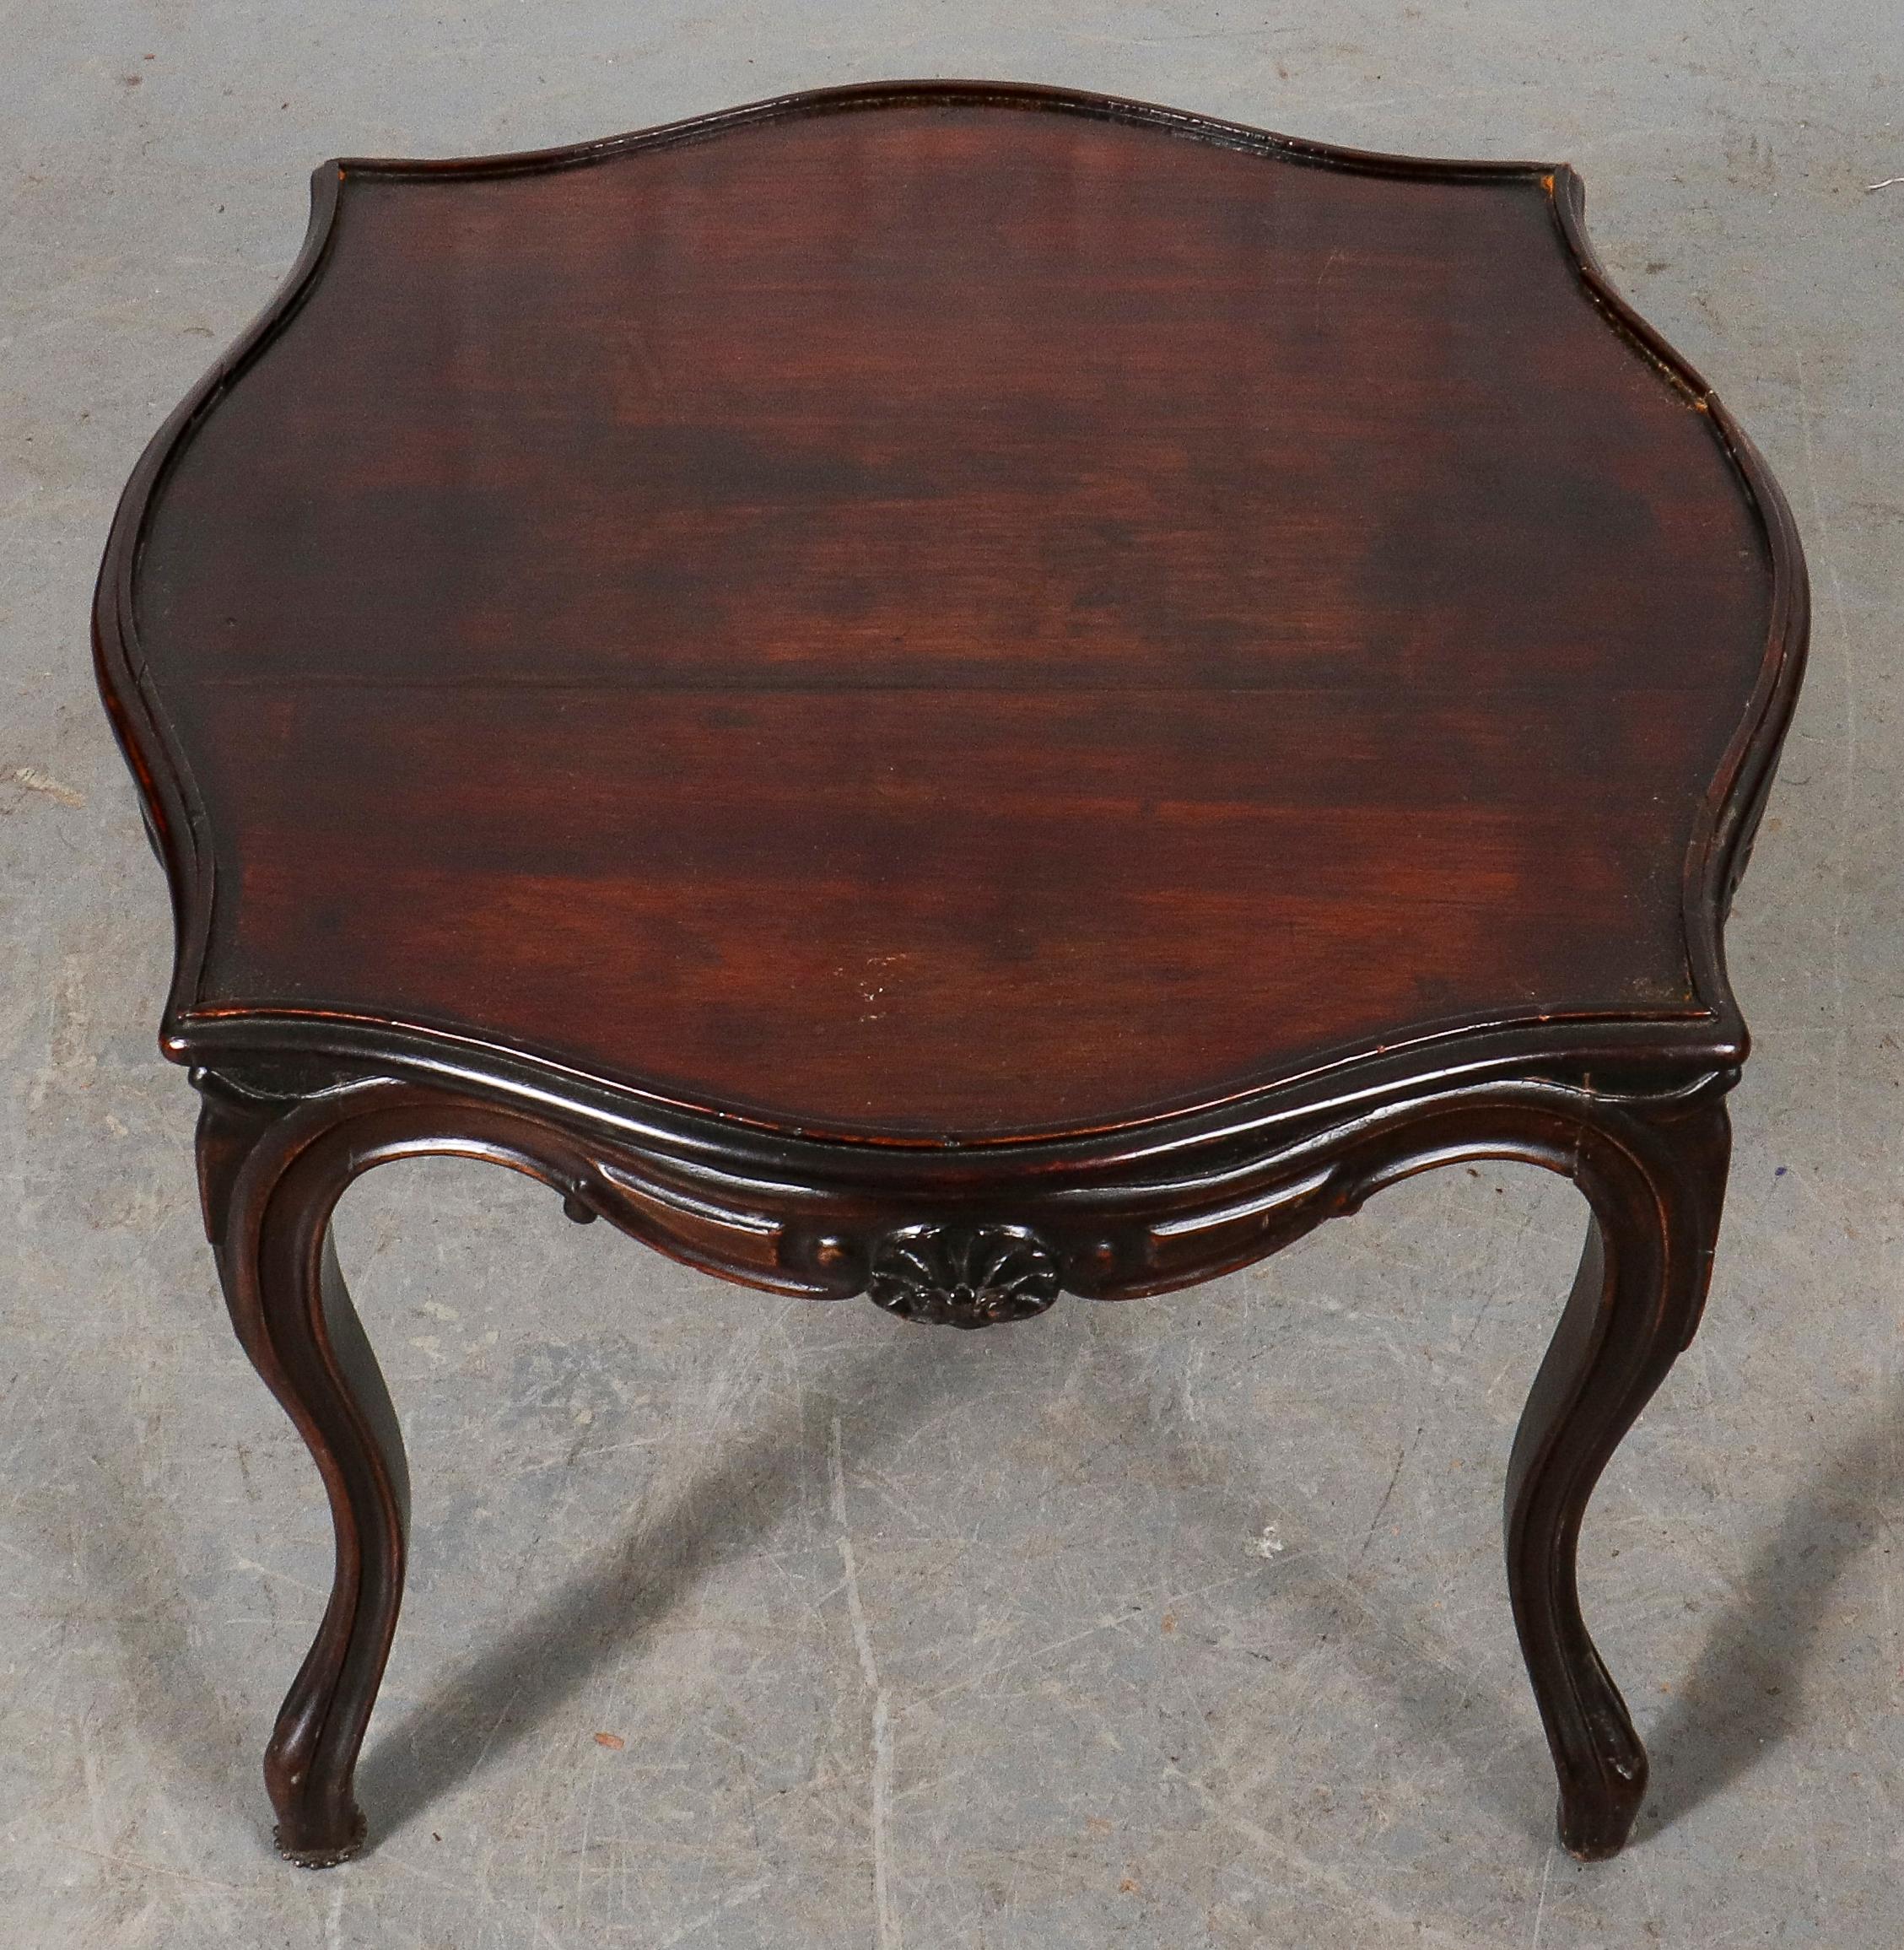 Baroque Revival diminutive side table with cabriole legs and square scalloped top. Measures: 16.5